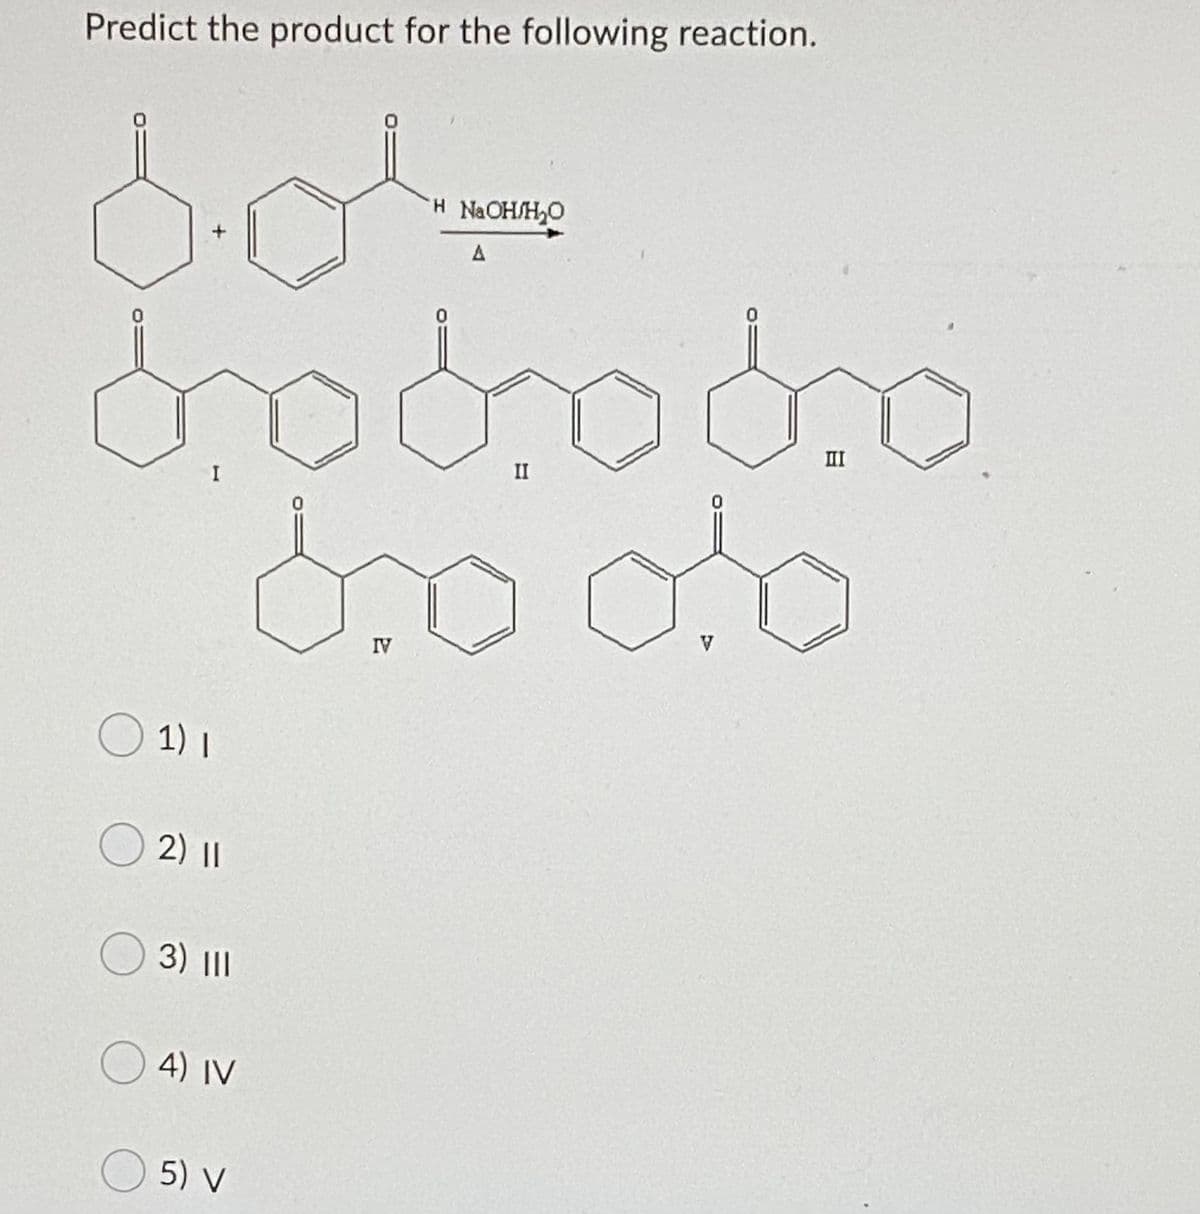 Predict the product for the following reaction.
H NaOH/H,O
A
II
II
I
V
IV
1) I
2) ||
3) |II
O 4) IV
5) V
